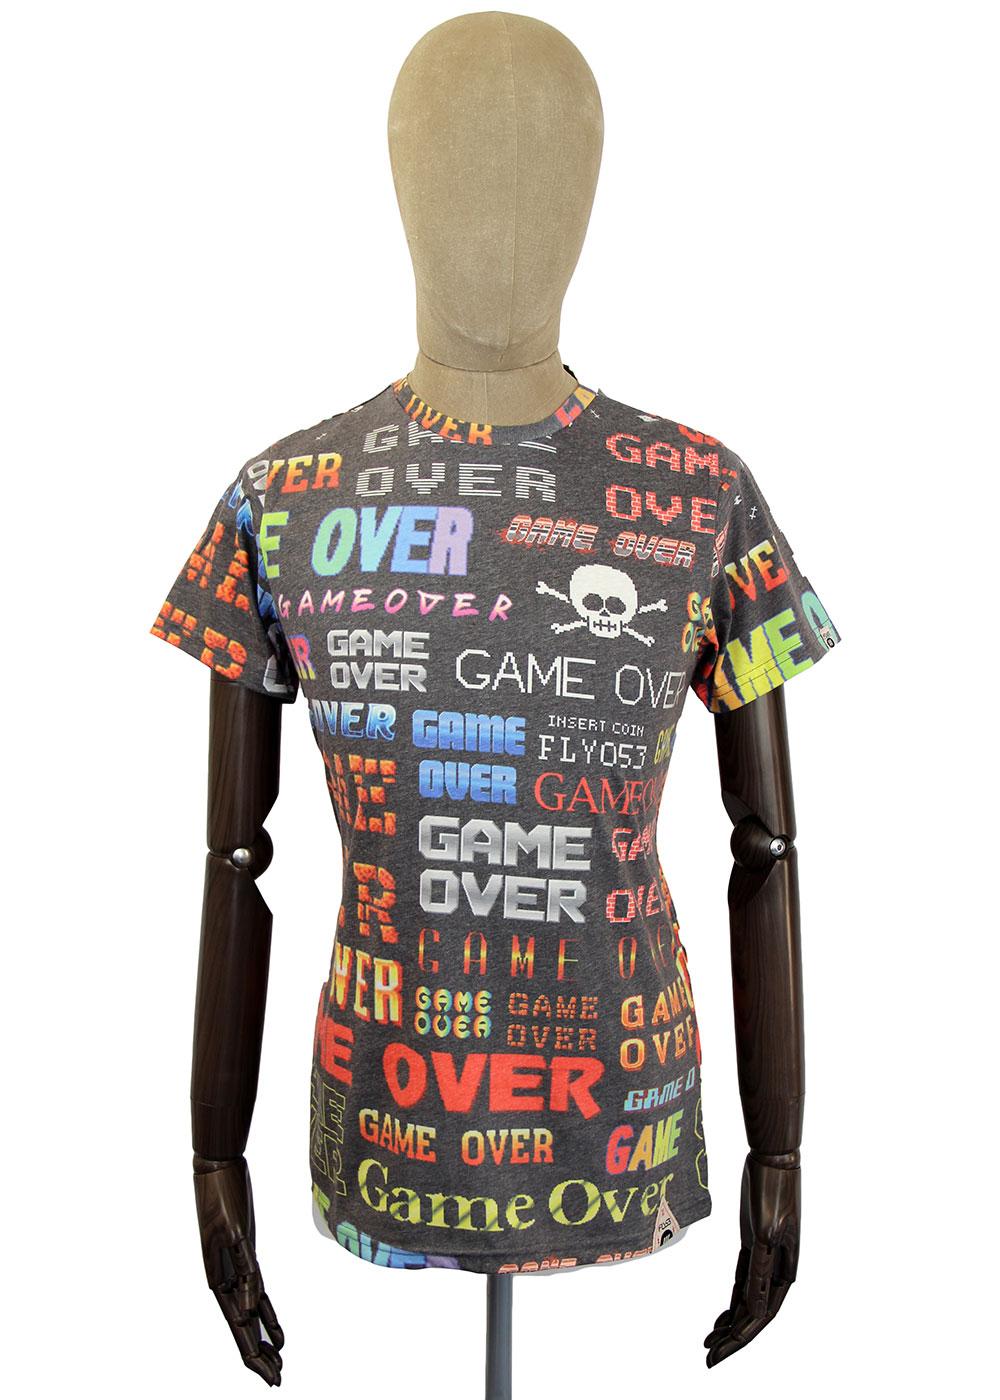 Coda FLY53 Retro Indie Game Over Graphic T-shirt